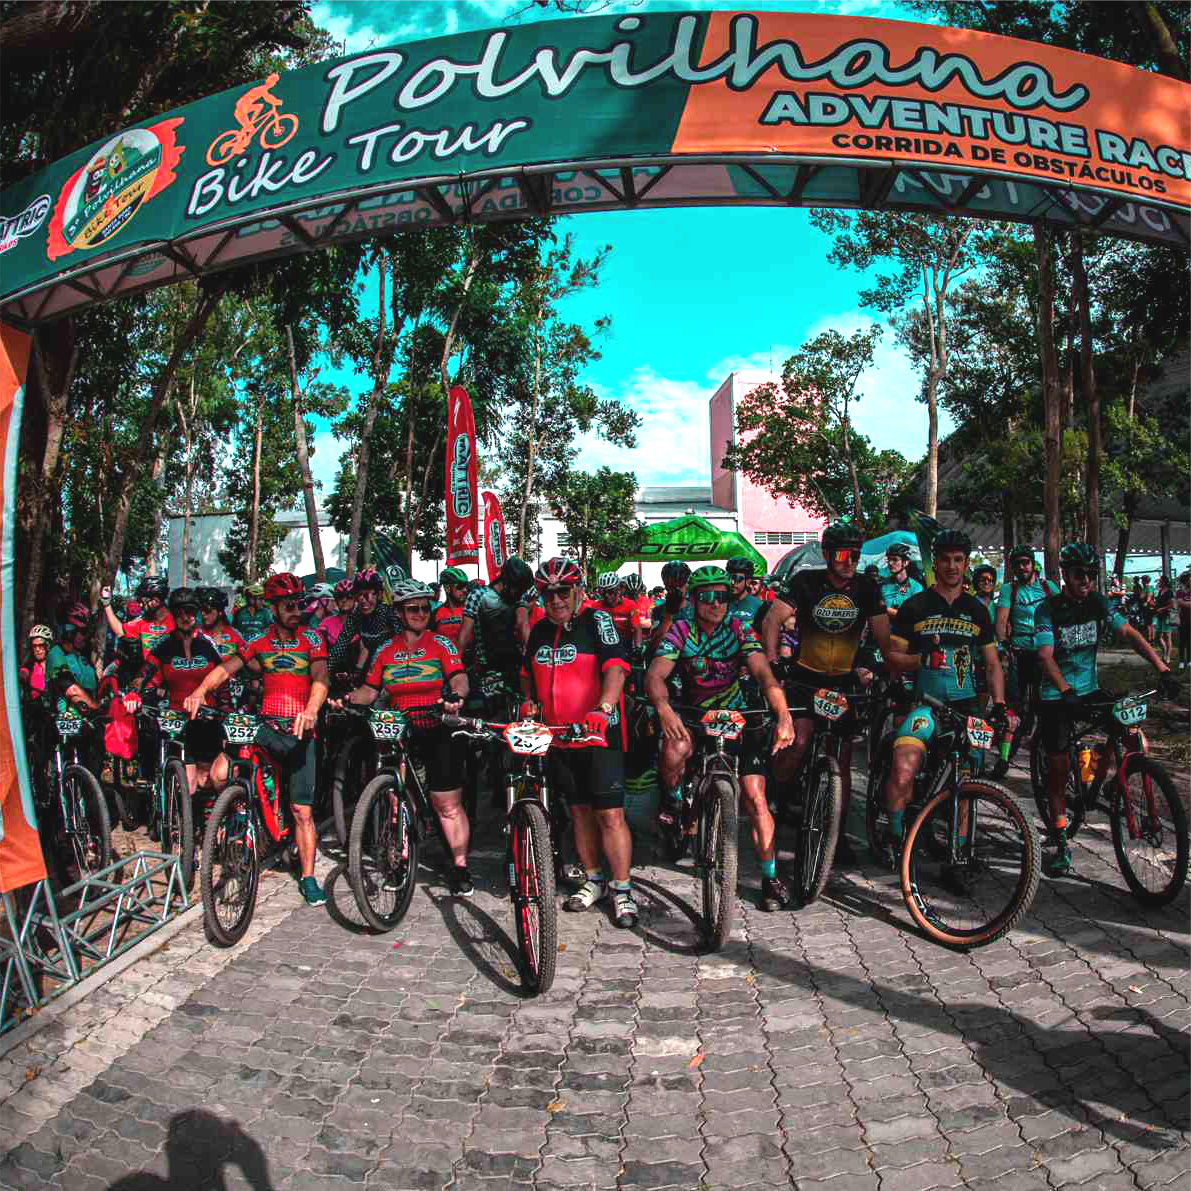 You are currently viewing 3ª Polvilhana Bike Tour